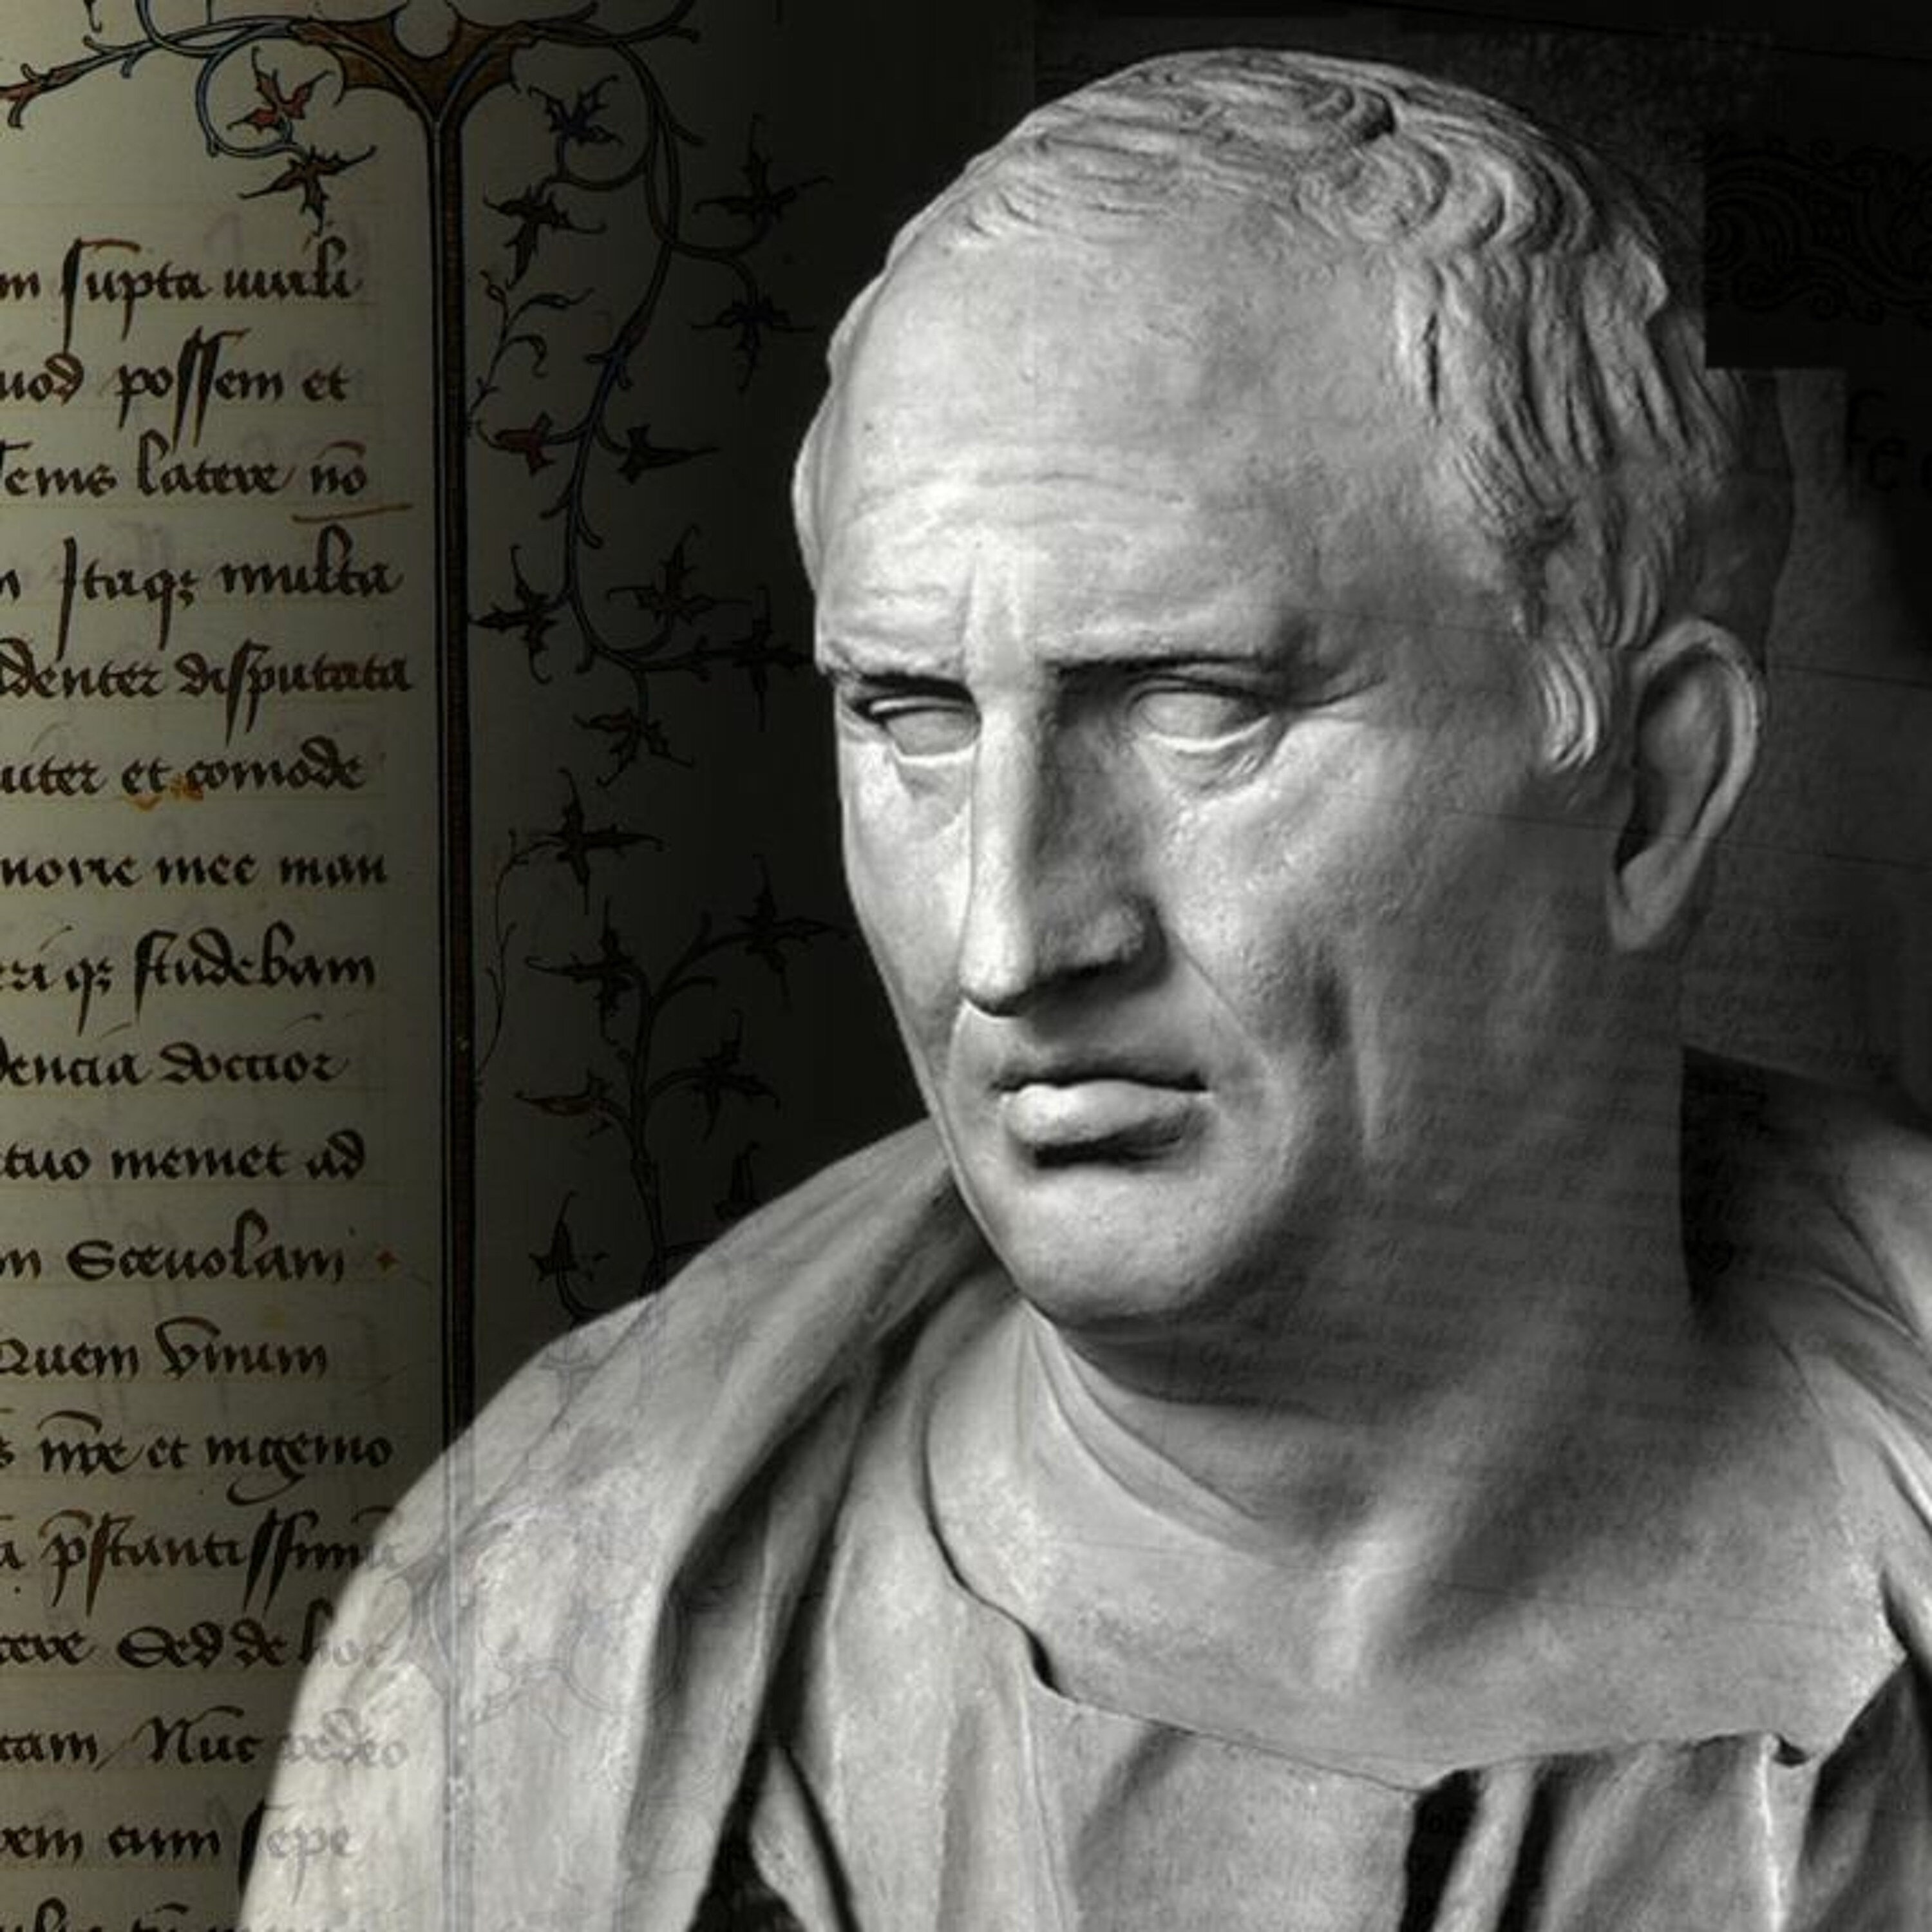 Hillsdale Dialogues 05-06-22: Cicero on Friendship